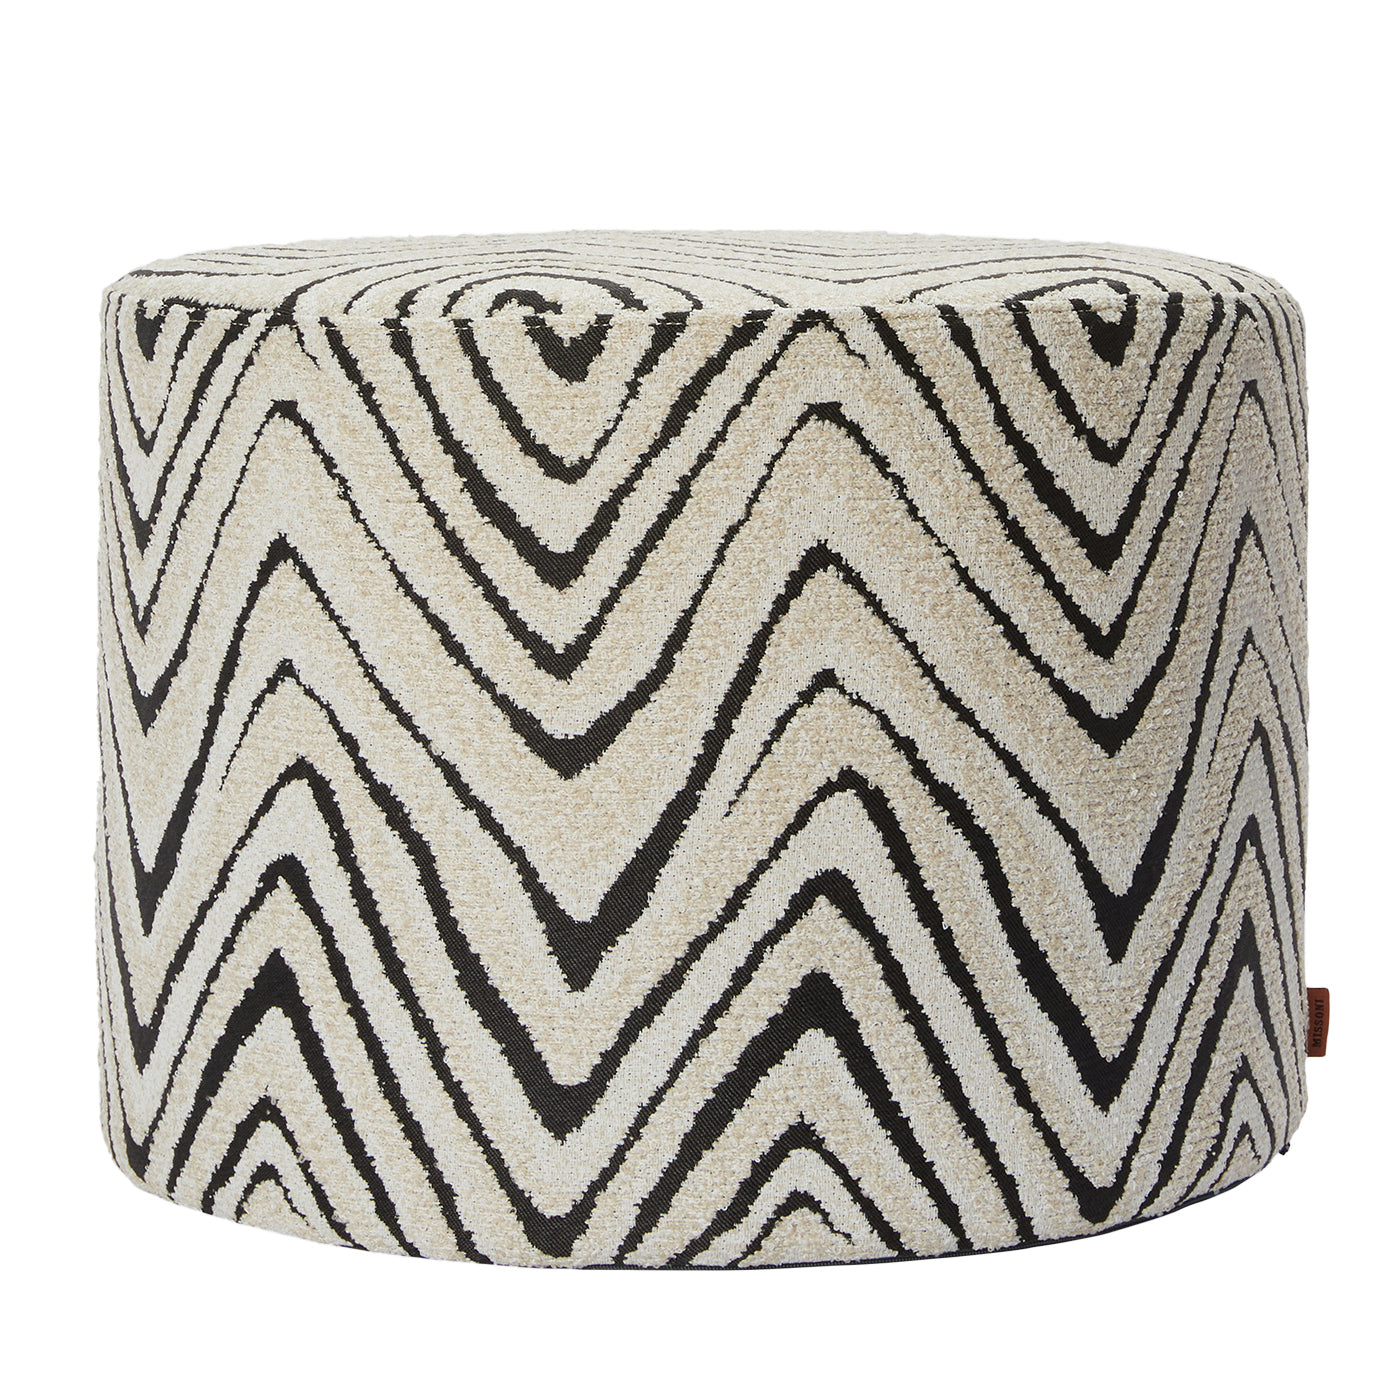 Savana Cylindrical Black and White Chevron Pattern Outdoor Pouf  - Main view